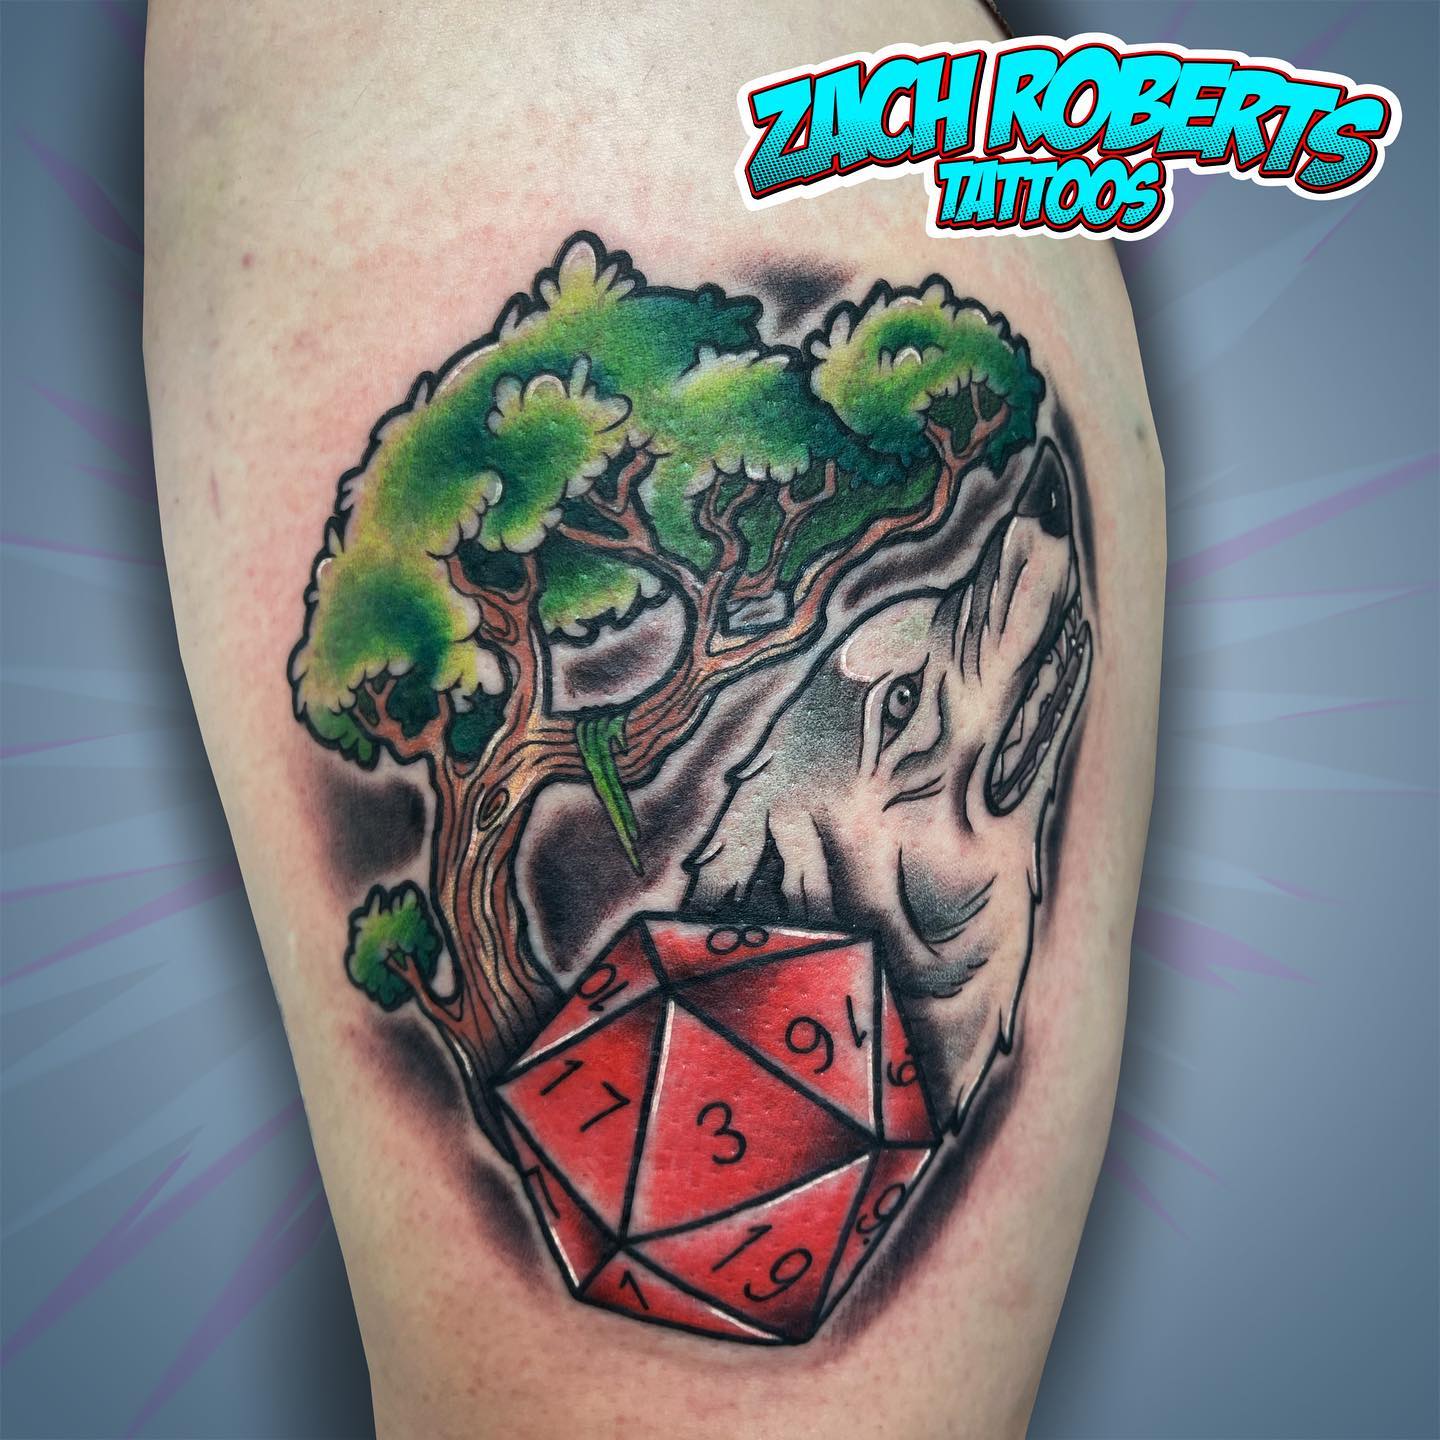 There is a great community of FRP devotees. Get this tattoo, which was designed with wolf and FRP dice to show your interest.